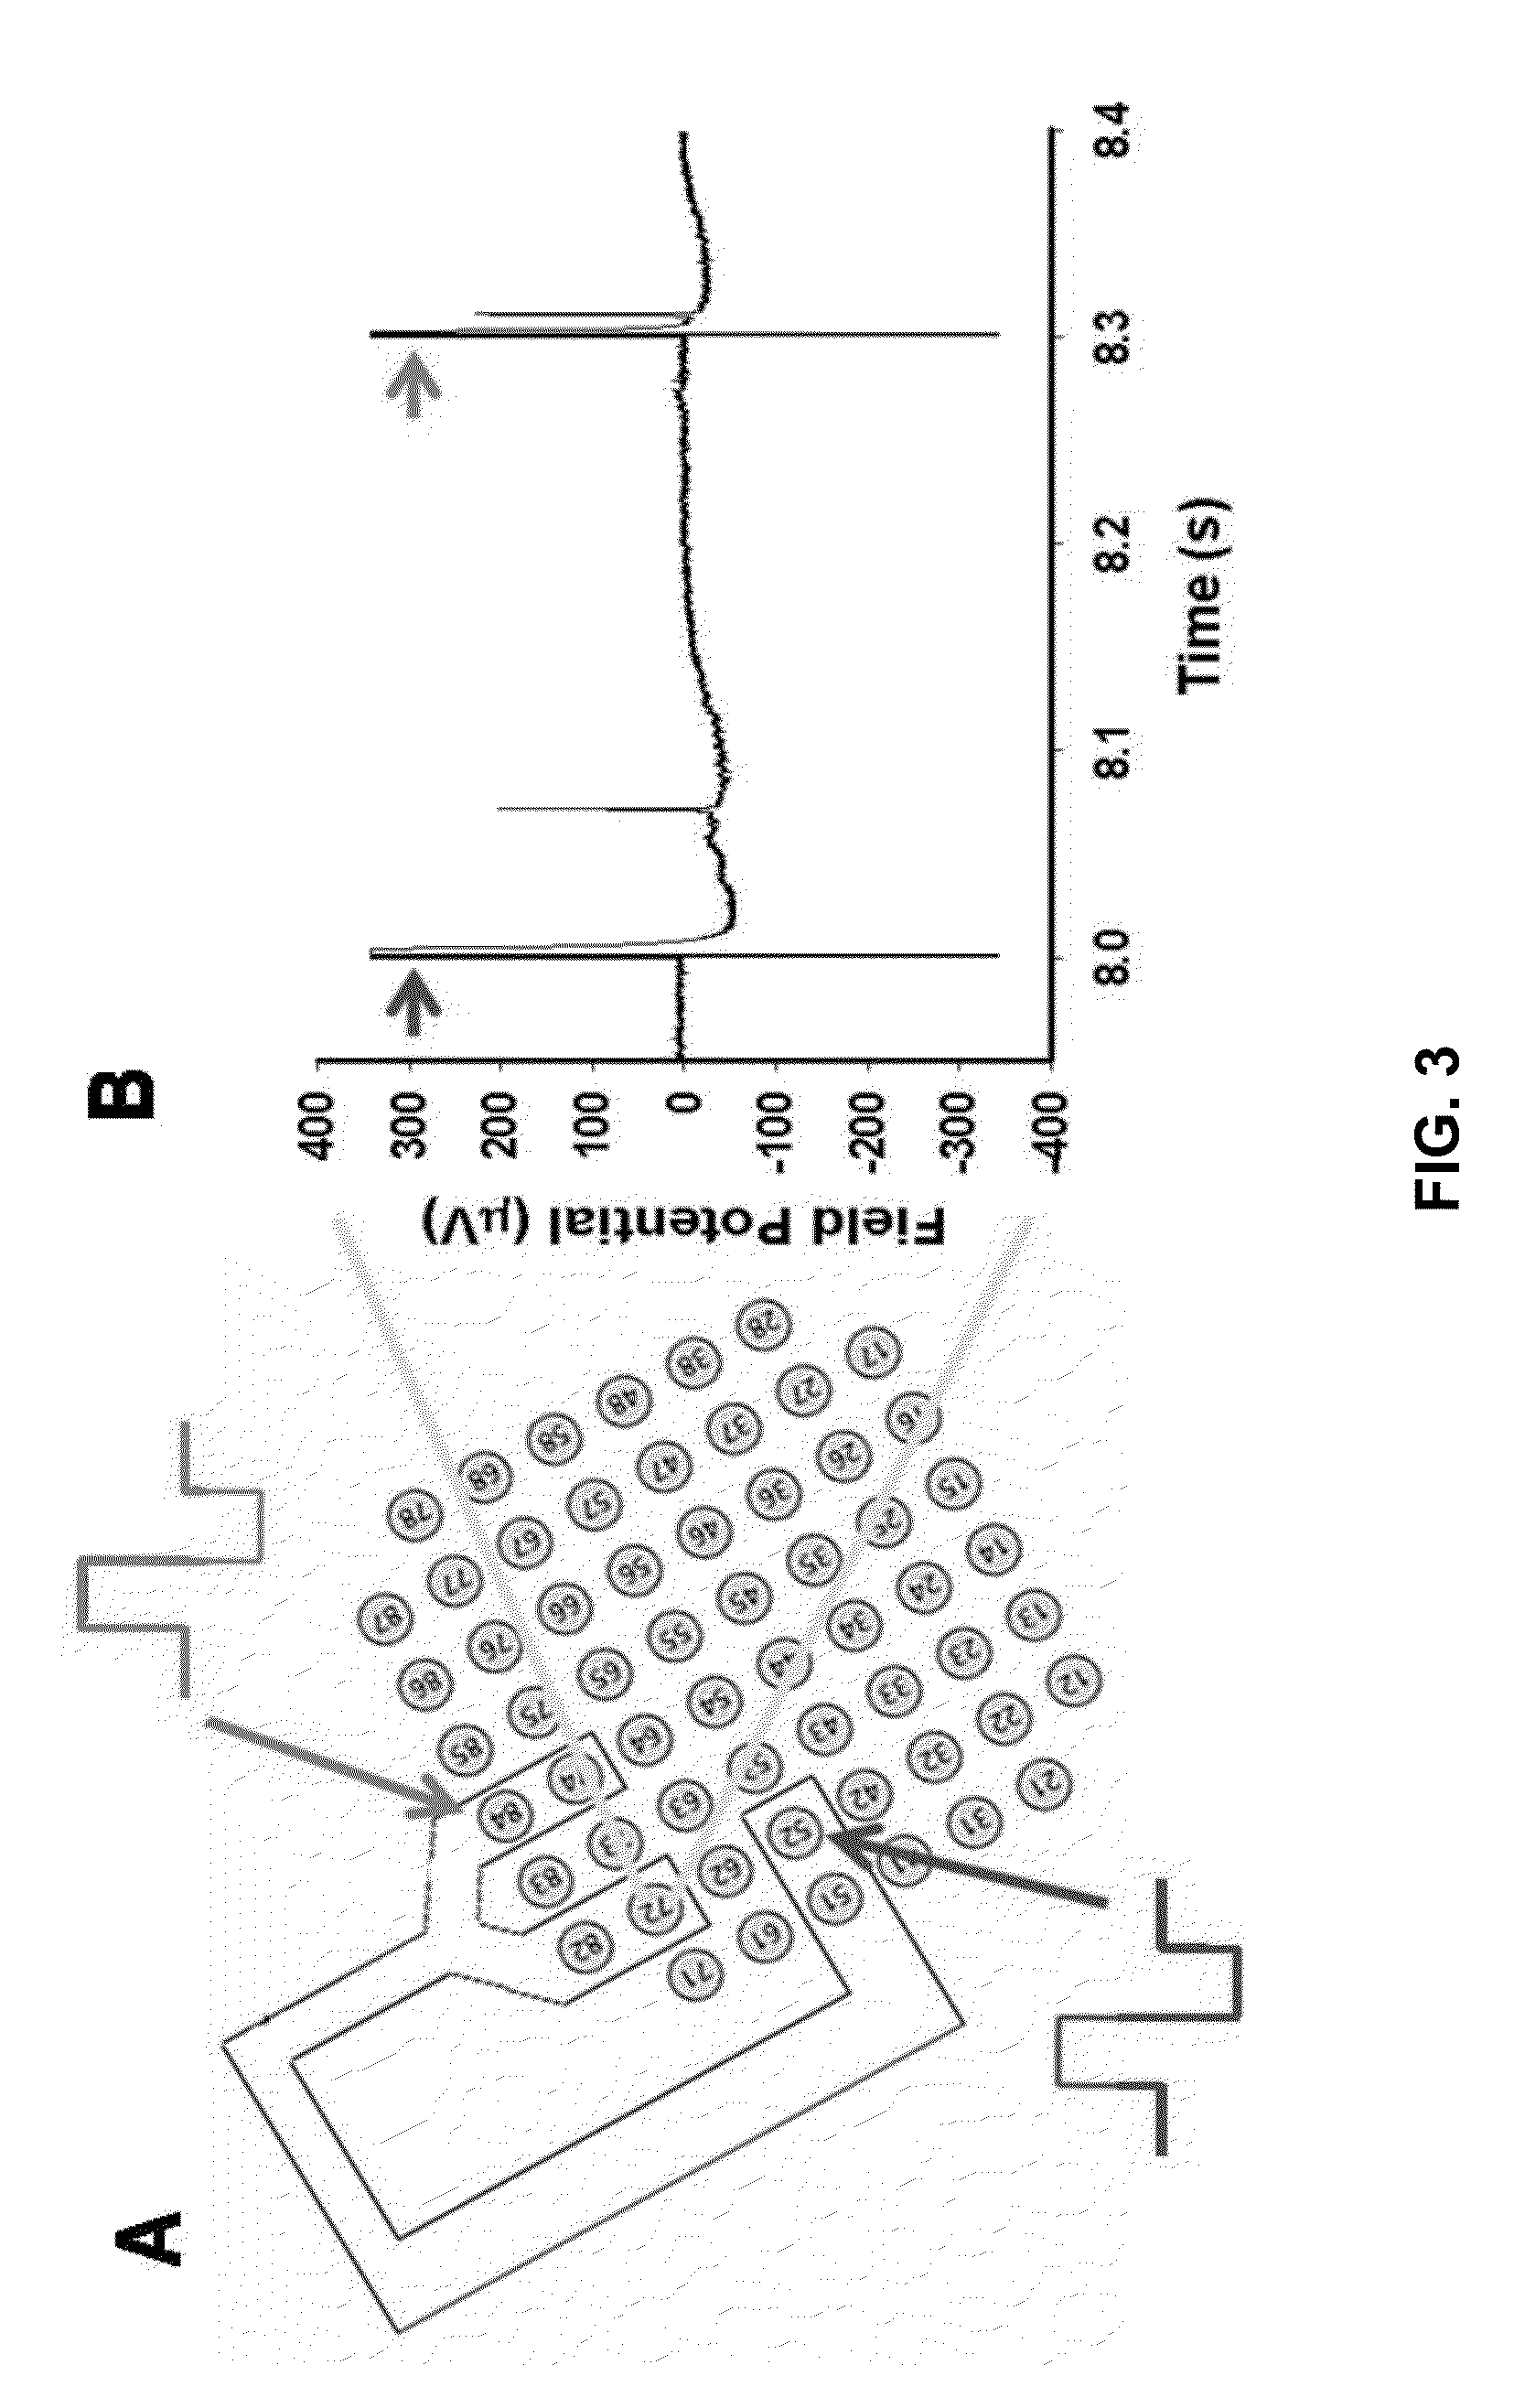 Patterned cardiomyocyte culture on microelectrode array